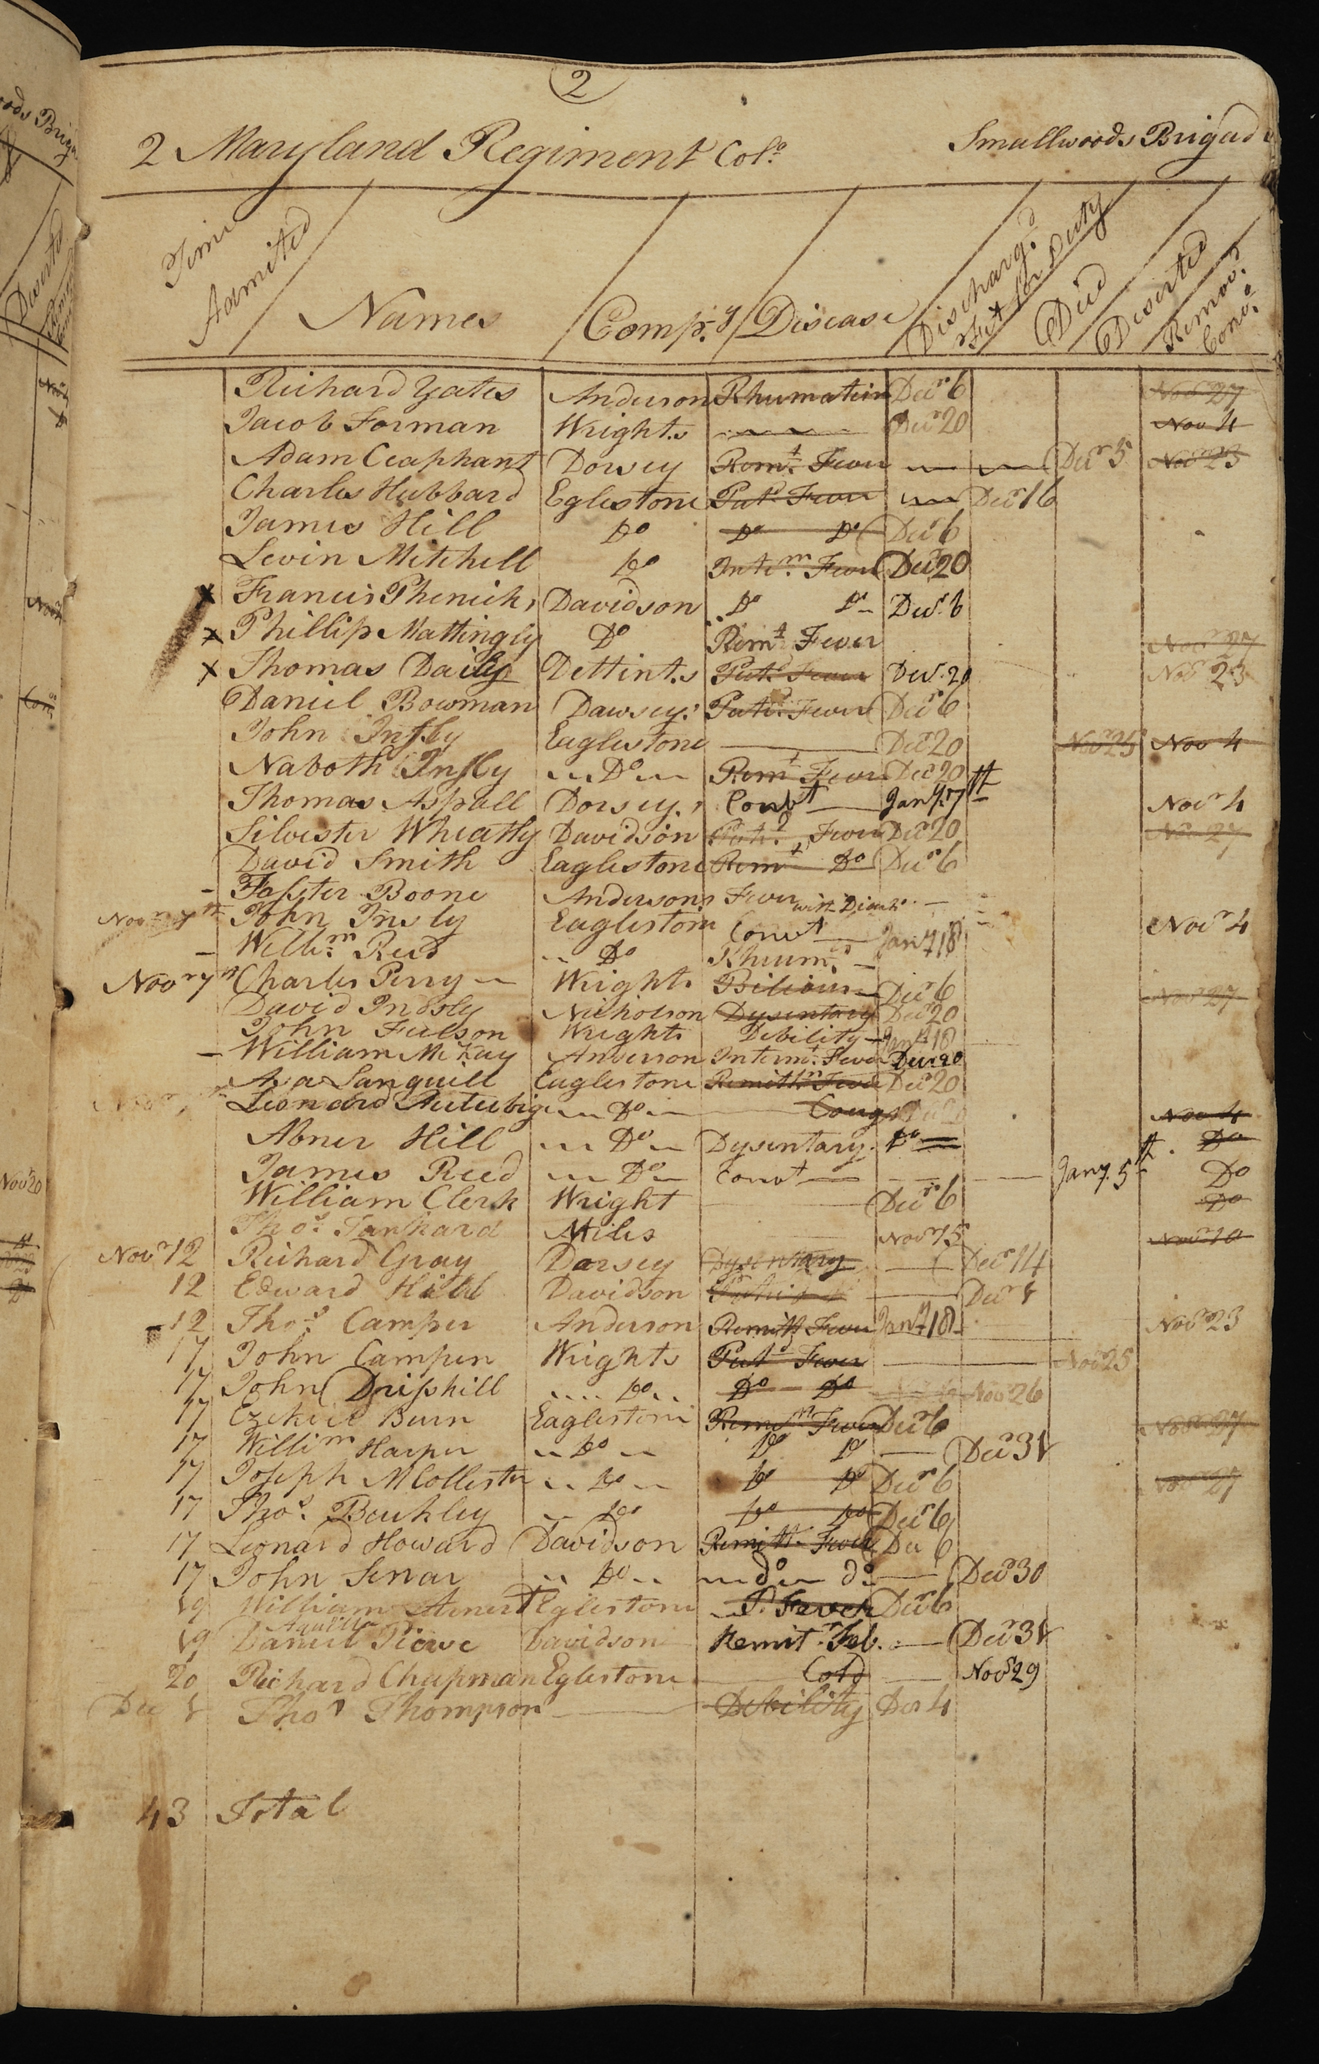 Register of the patients admitted to the Continental Army “Flying Hospital” following the Battle of Brandywine, Henry Latimer, September 16, 1777-early January 1778